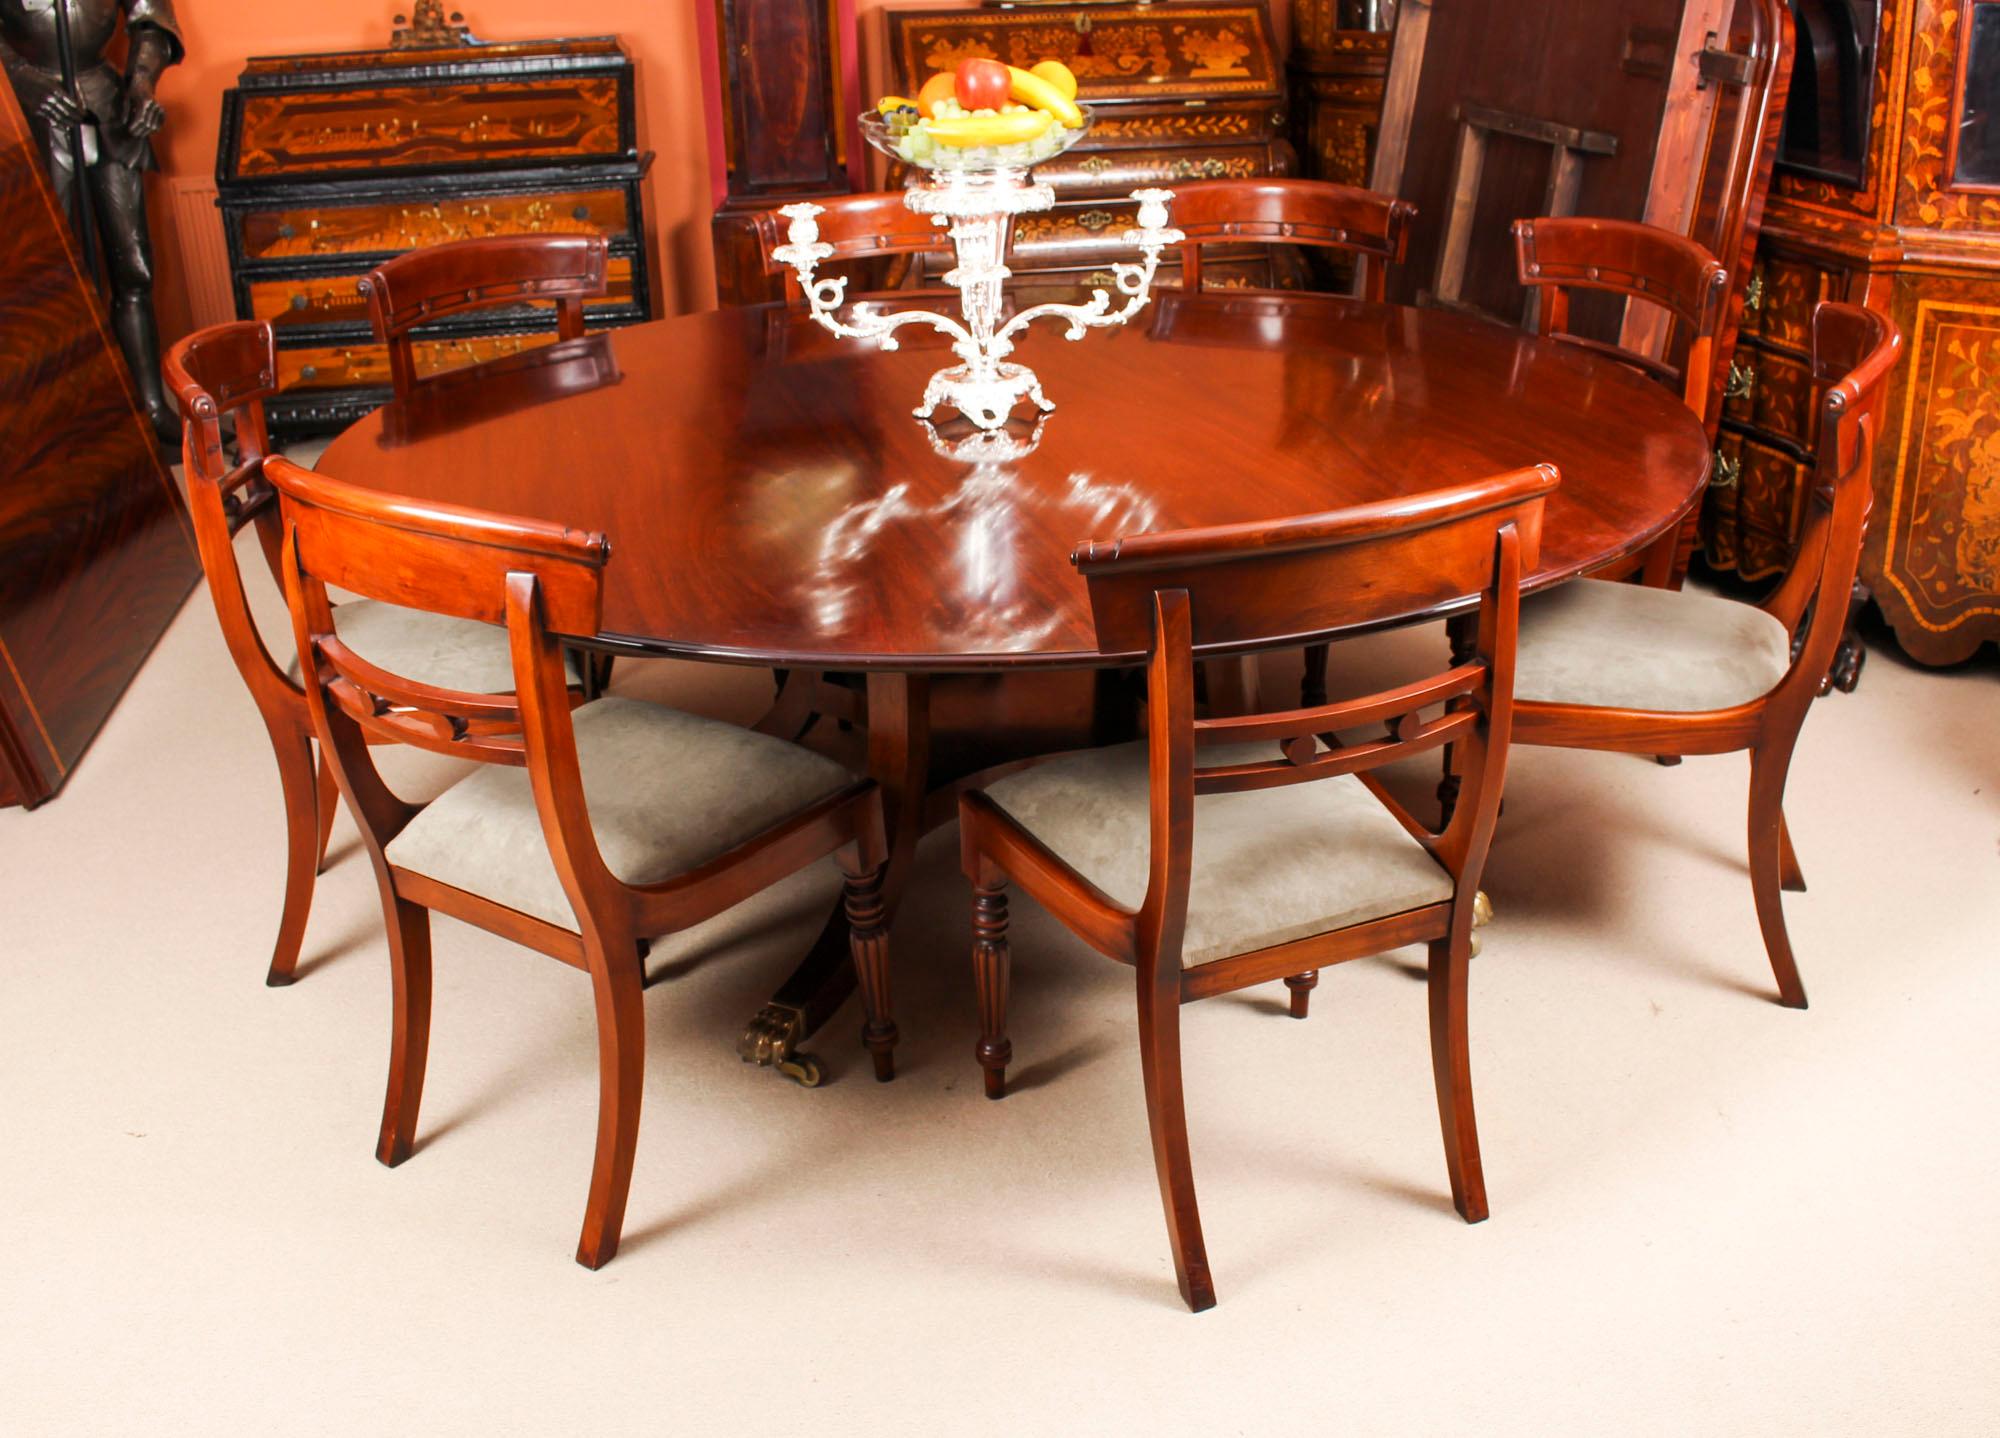 This beautiful dining set comprising a Regency style flame mahogany dining table made by the Master Cabinet maker William Tillman and bearing his label on the underside, circa 1970 in date, with a set of eight bespoke dining chairs.

The table has